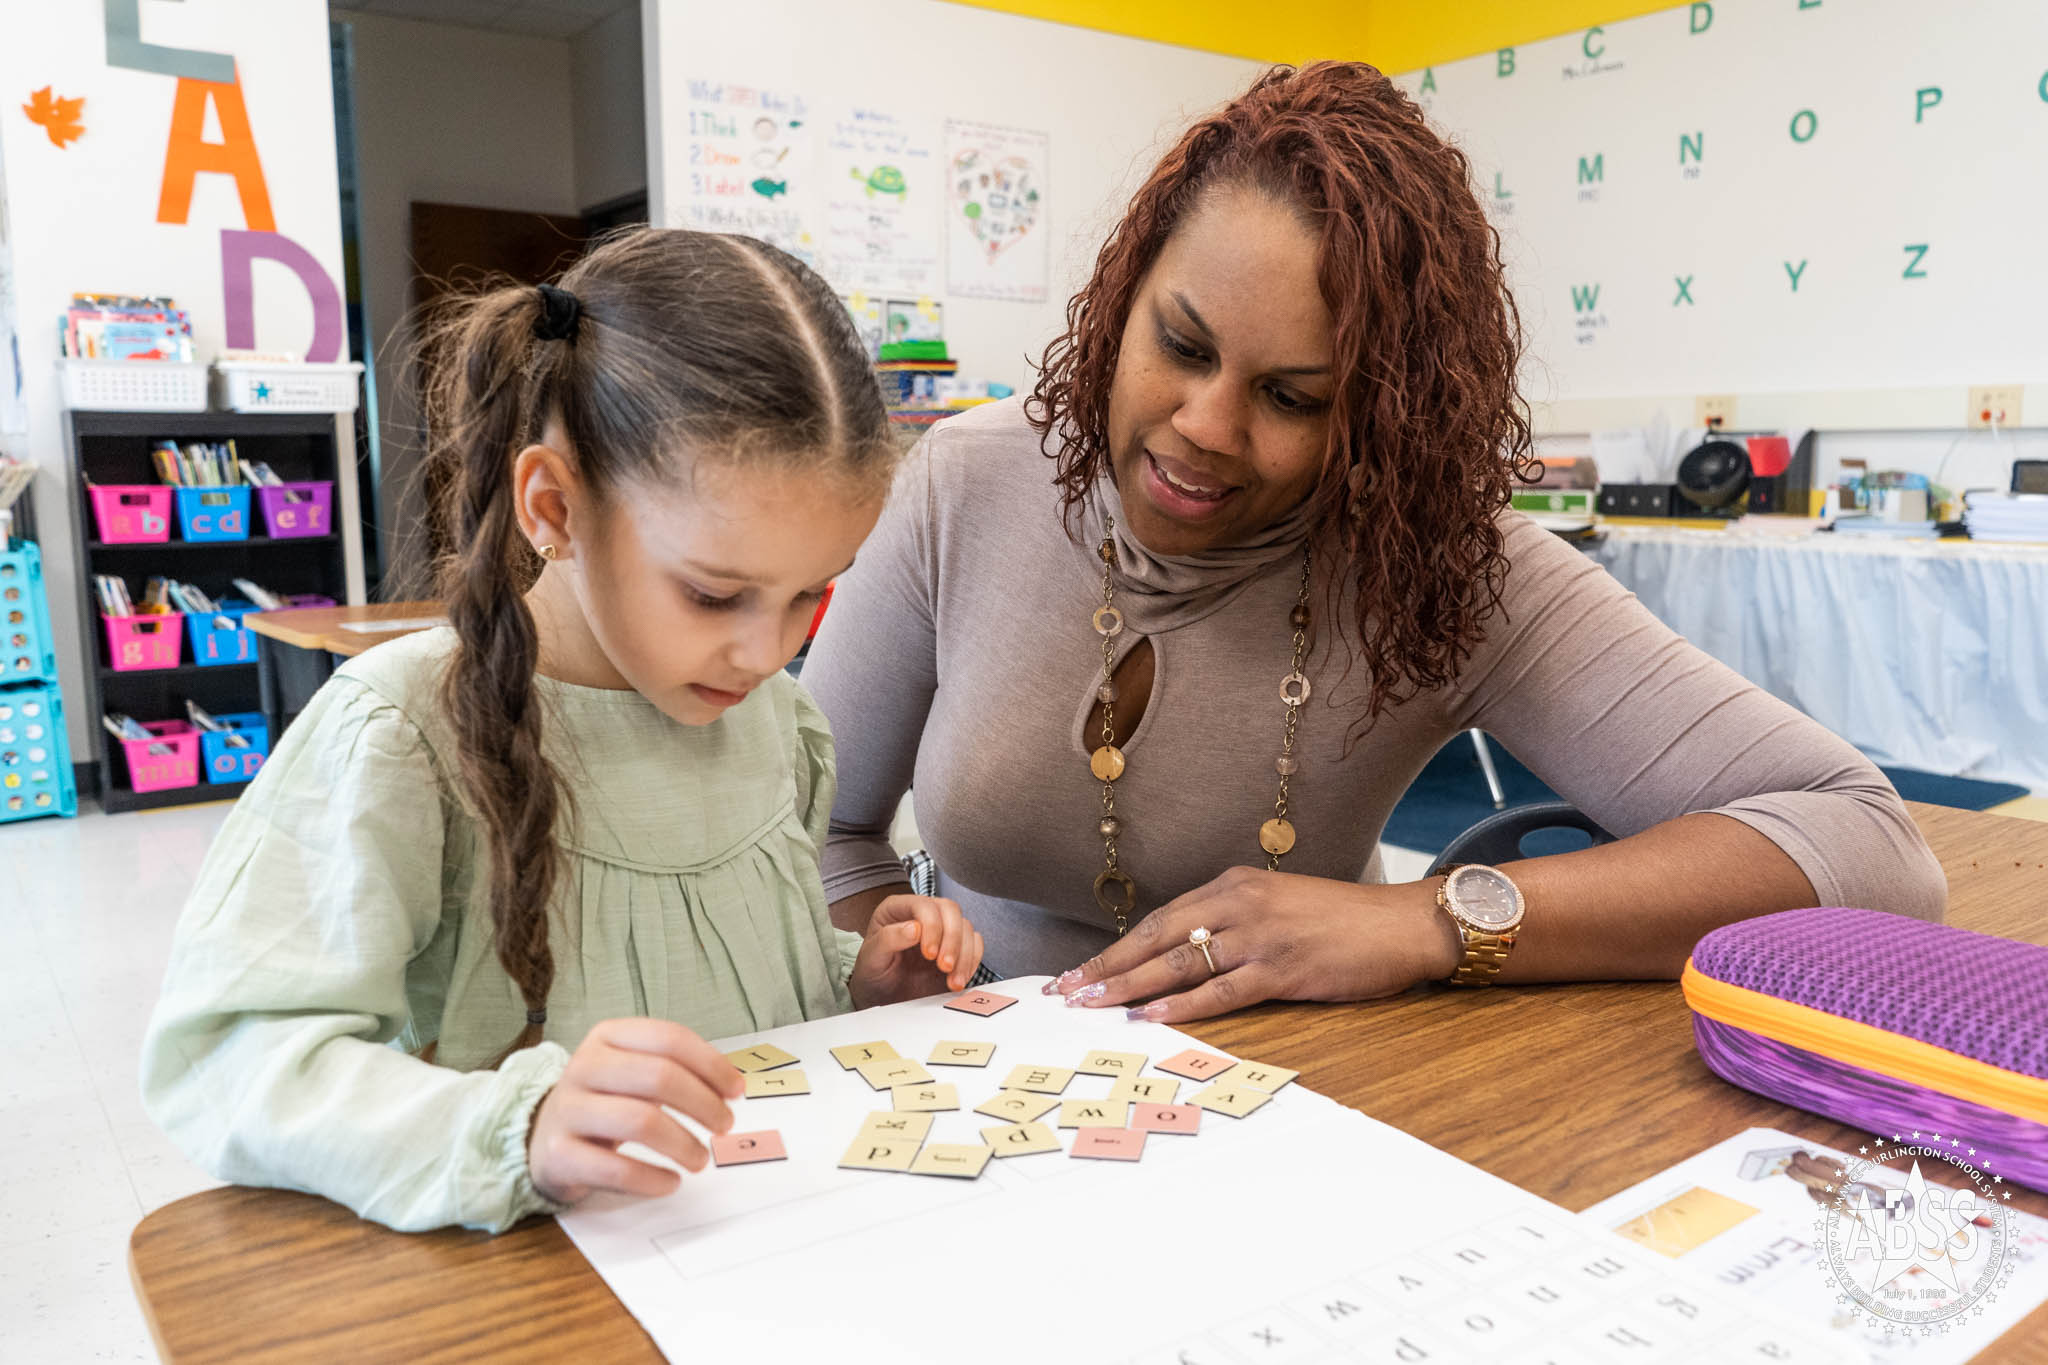 A teacher works with an elementary student with letter tiles on a whiteboard at her desk